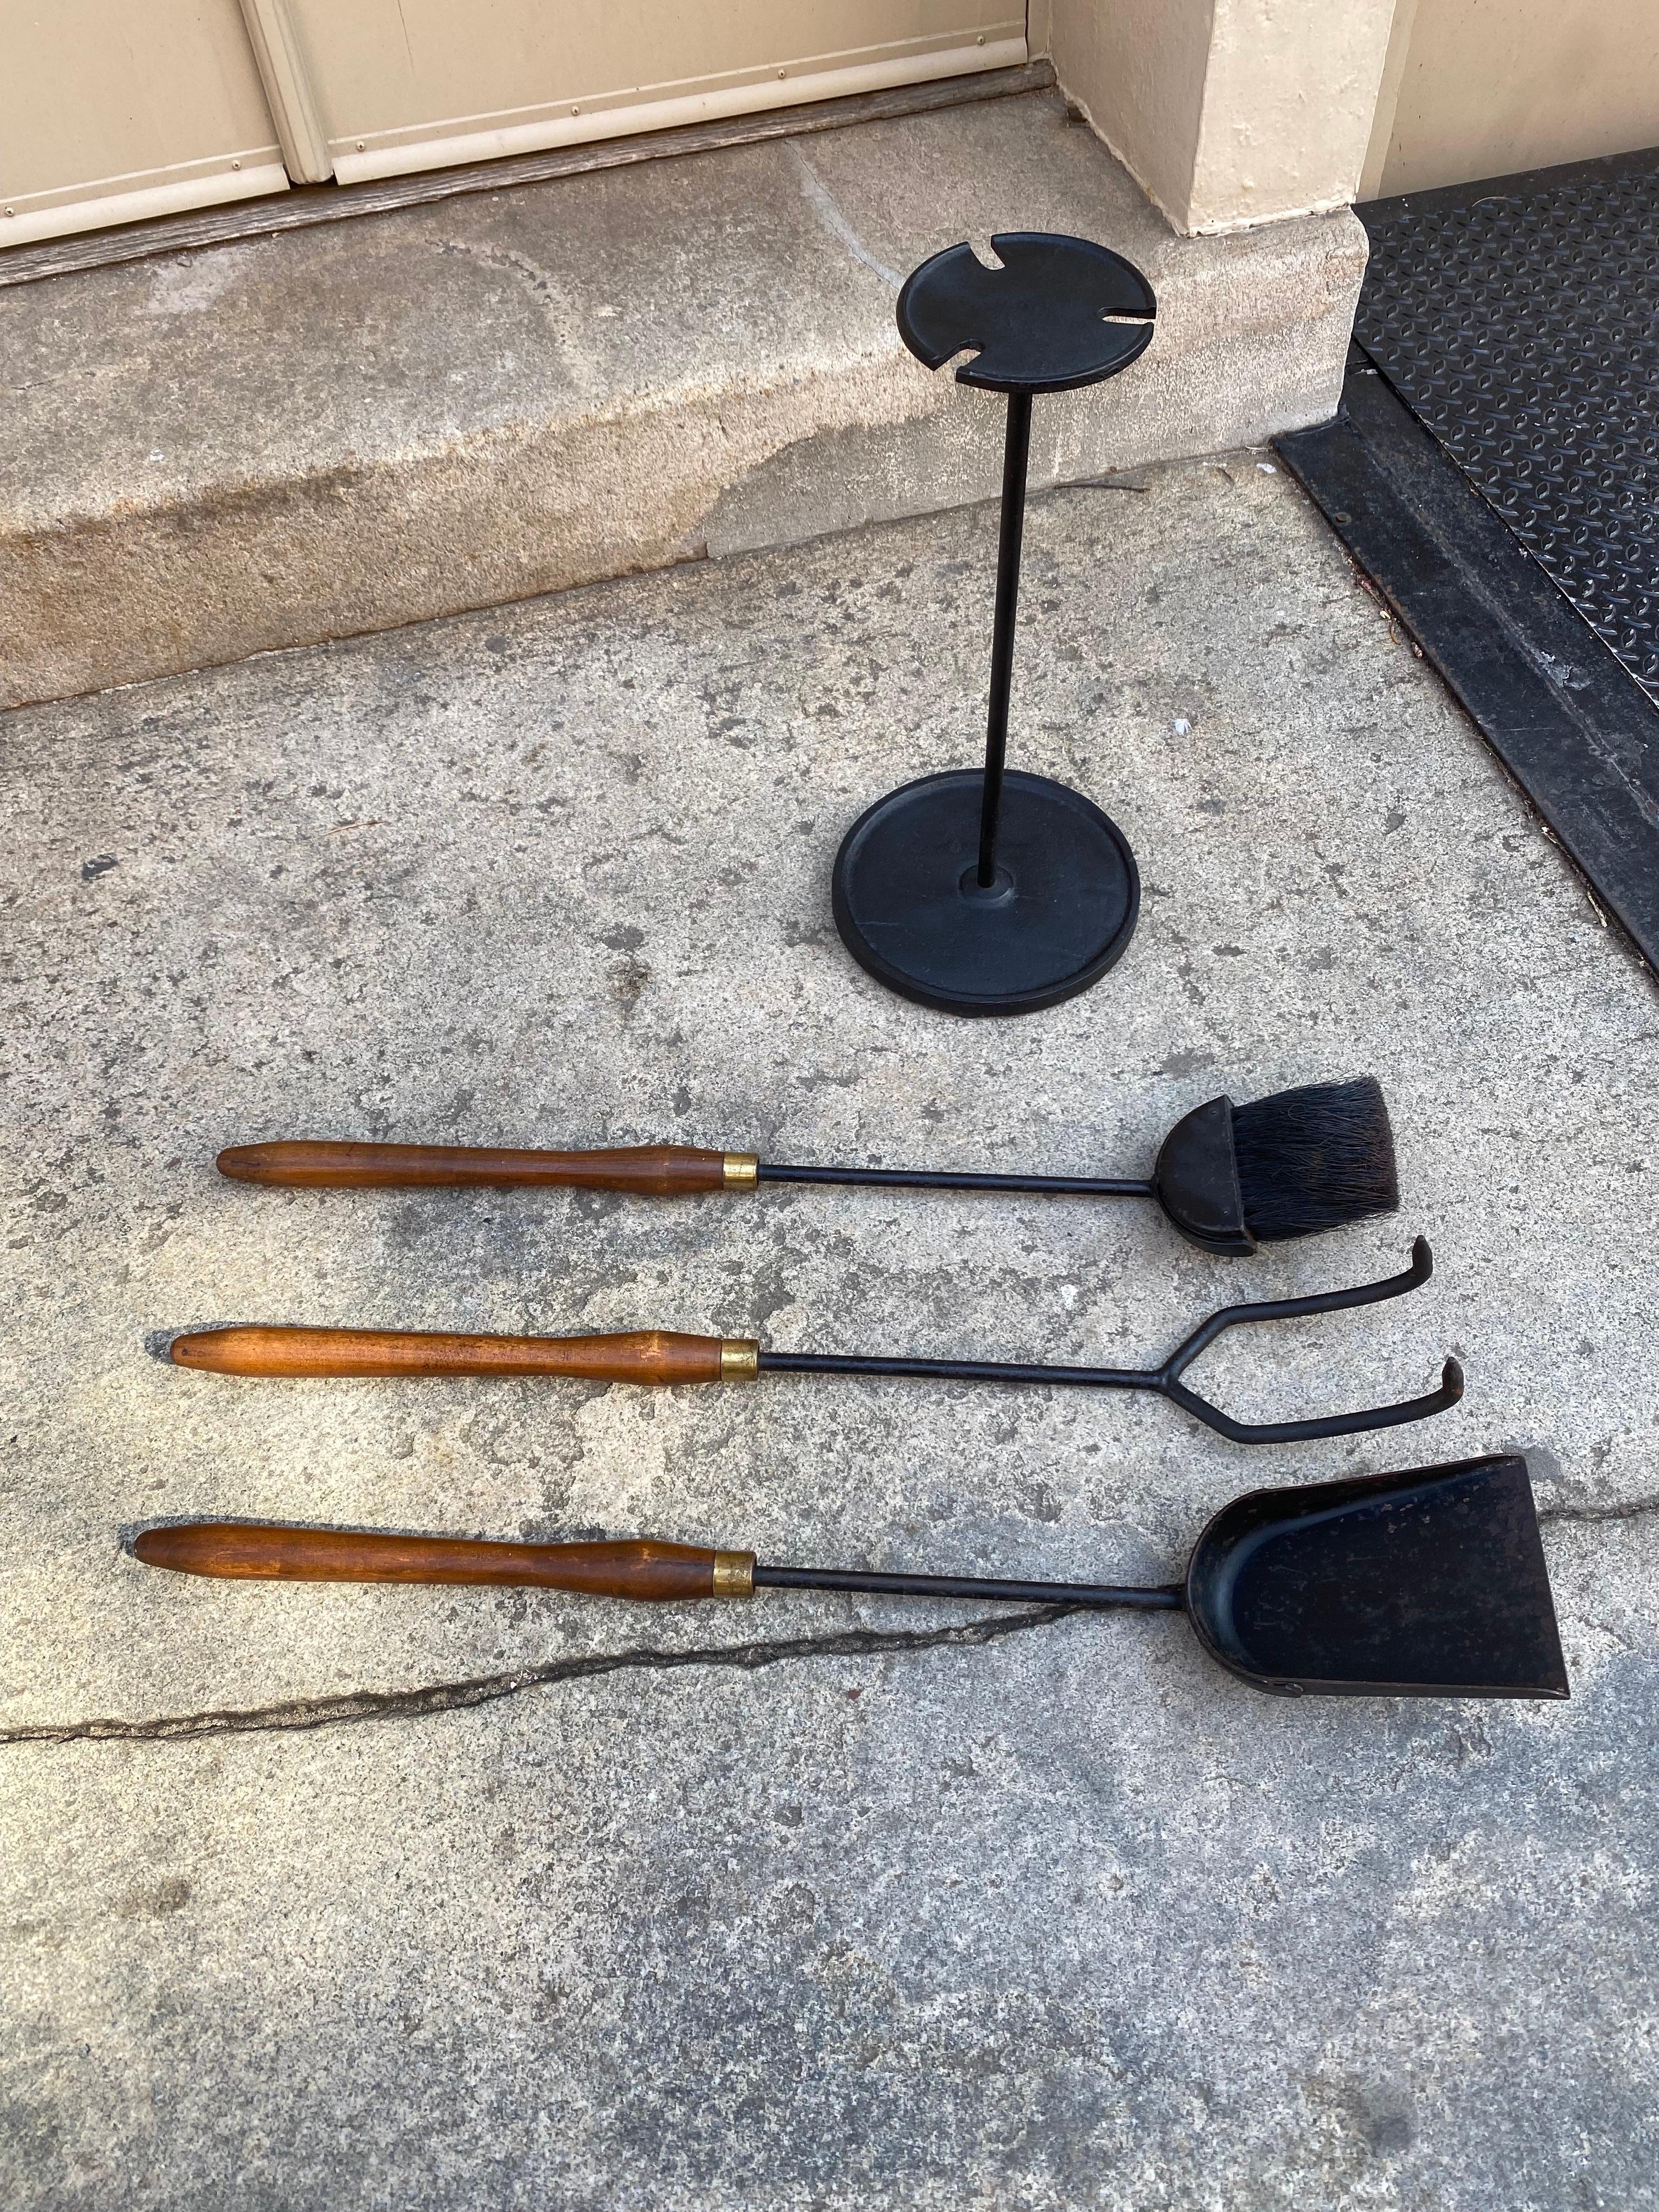 Mid century iron and wood 4 piece fireplace tool set. Nice sculpted wood elongated handles makes it easy to stay away from the heat! Sturdy metal stand cradles all three tools. Nice condition, with a stylist modern look!